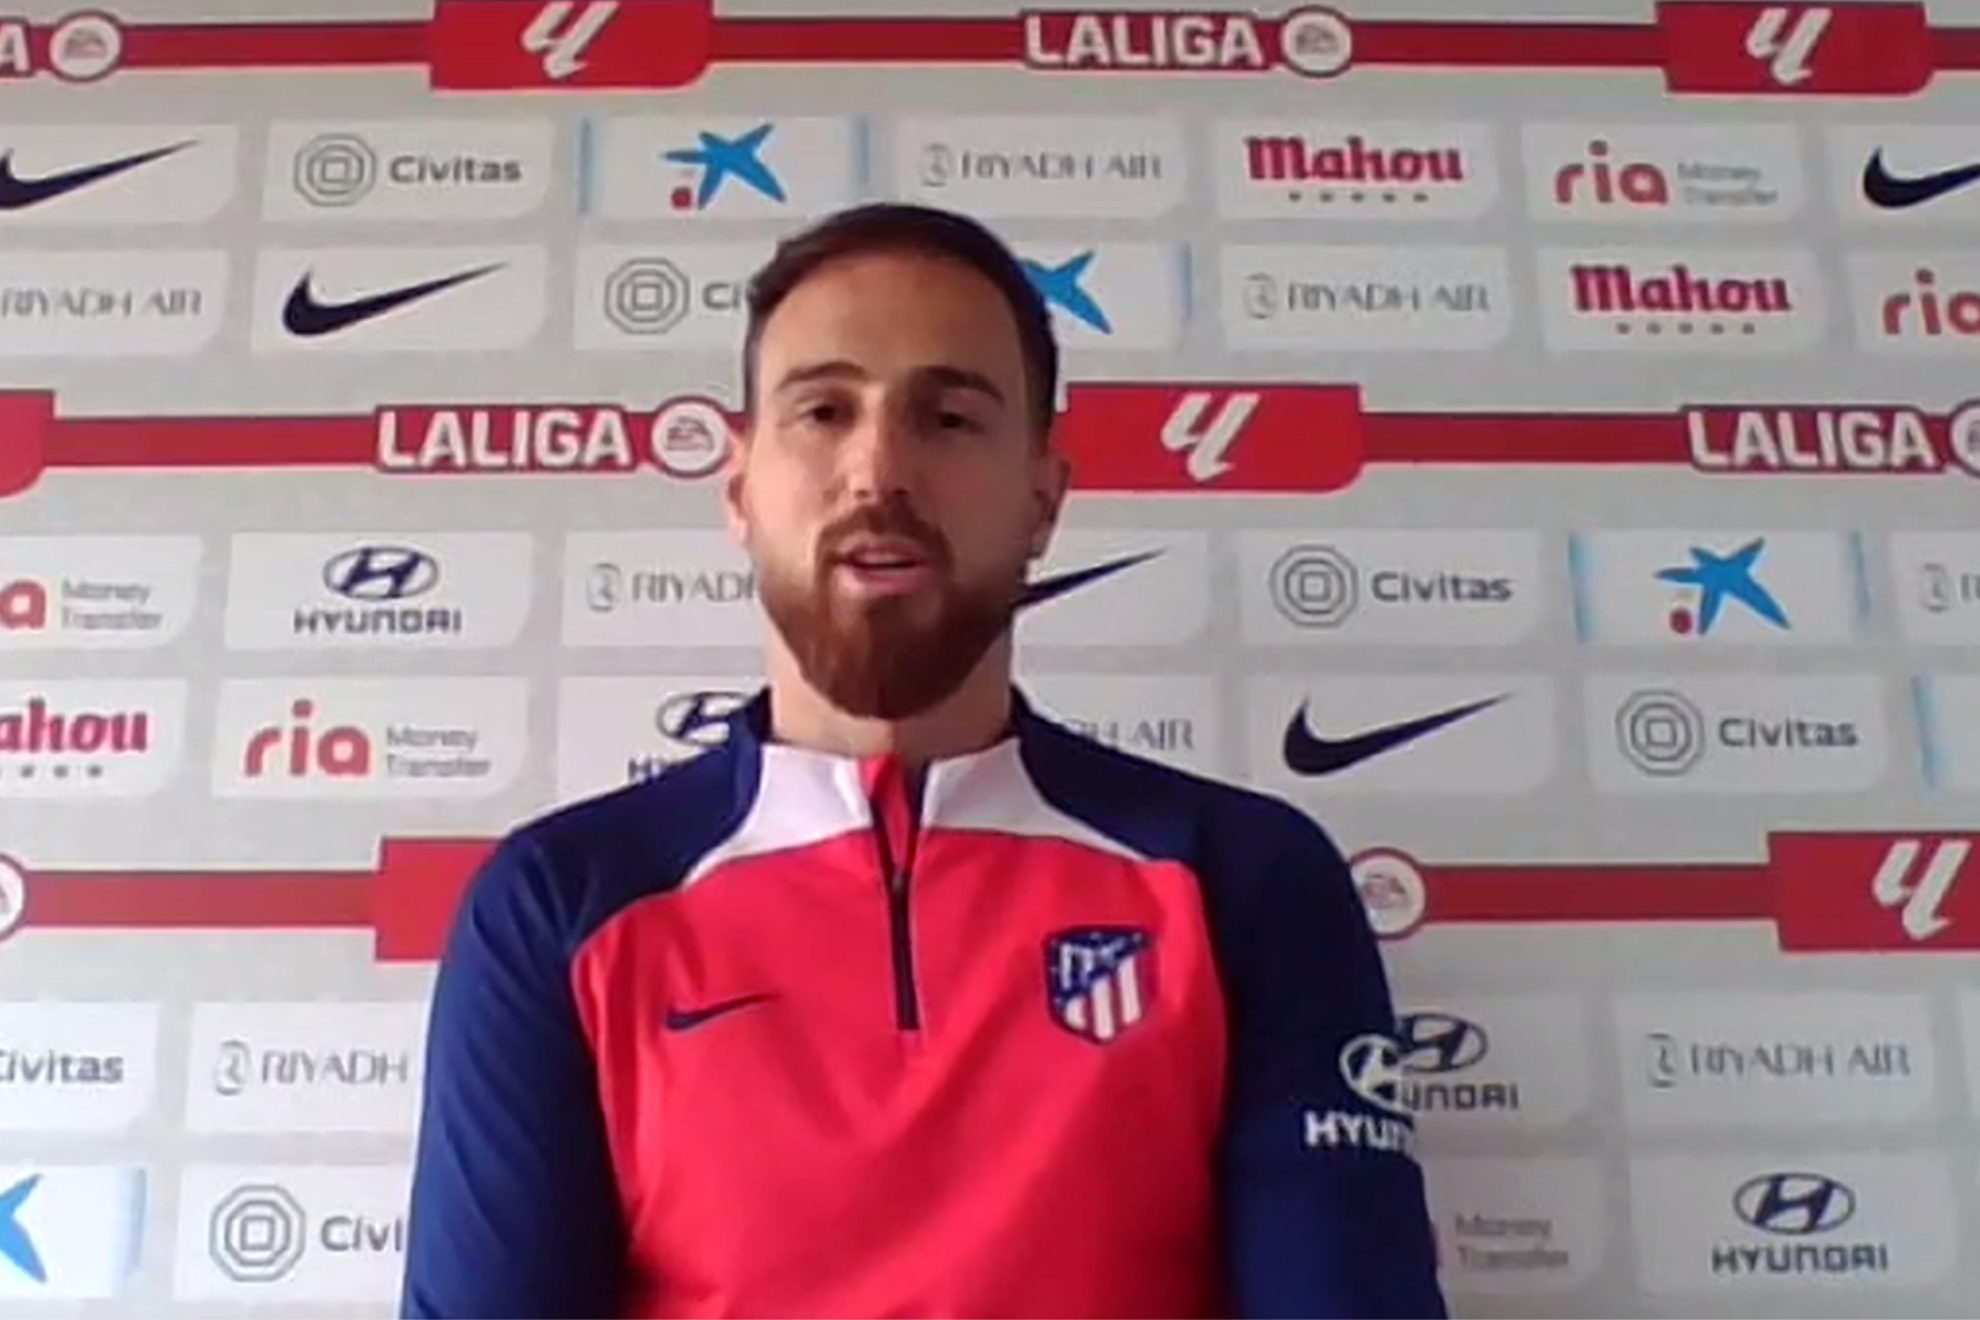 Oblak responds to a question during the ESPN/LaLiga live event.